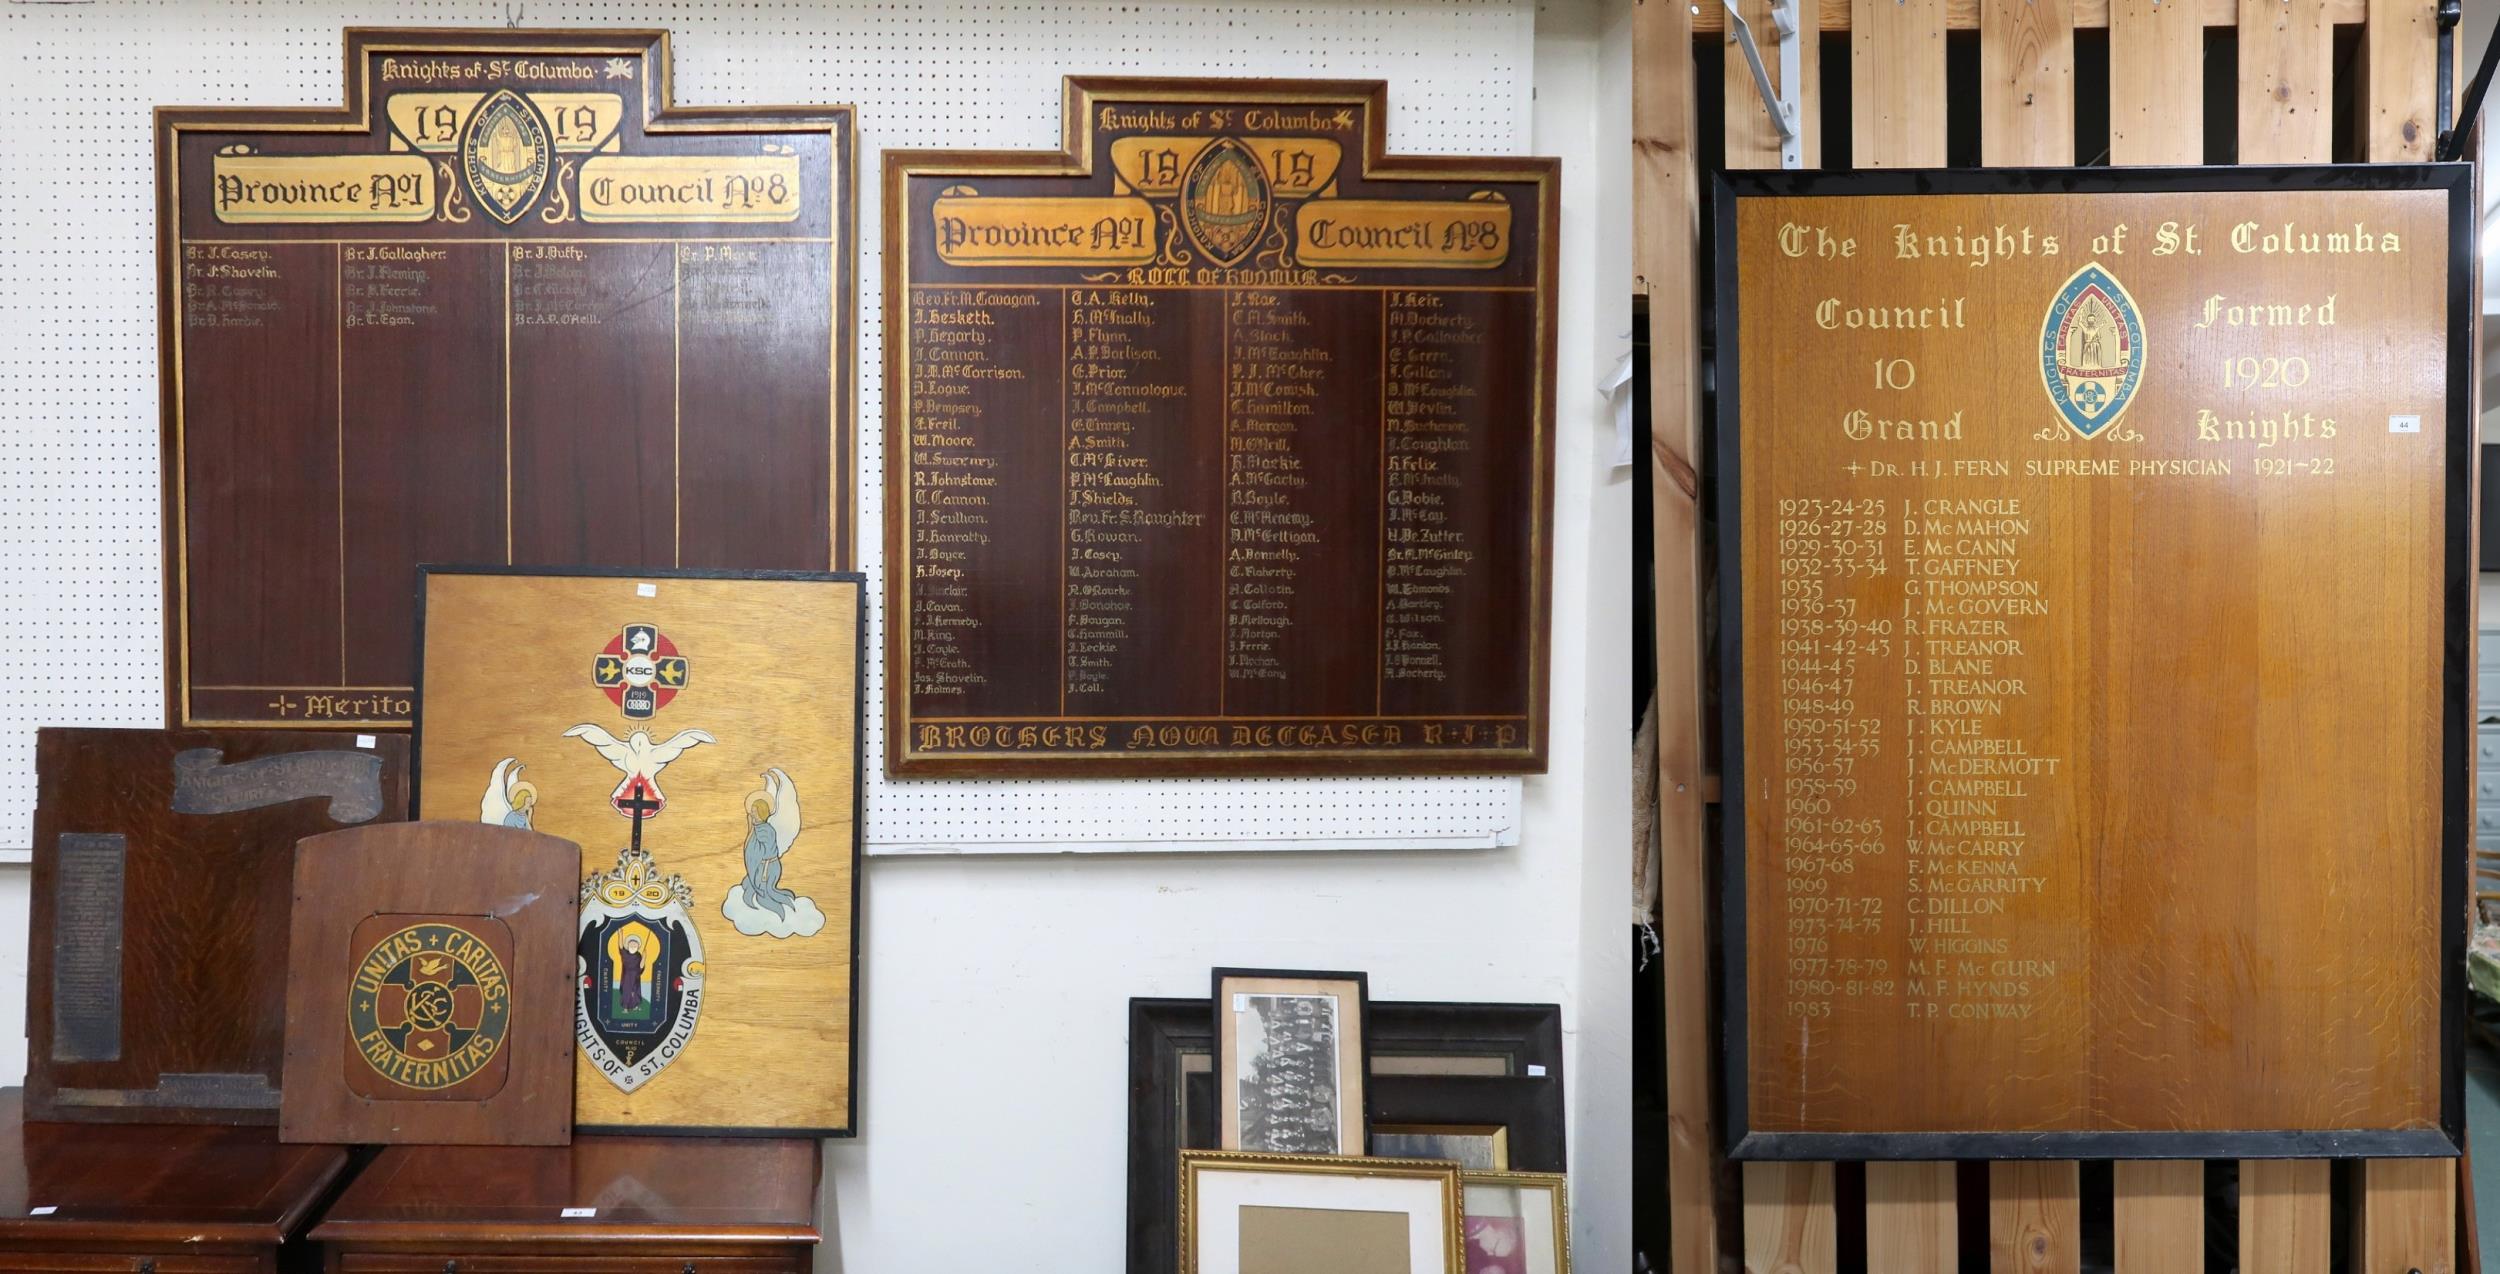 A lot to include Knights of St Columba roll of honour boards, squire section board for most